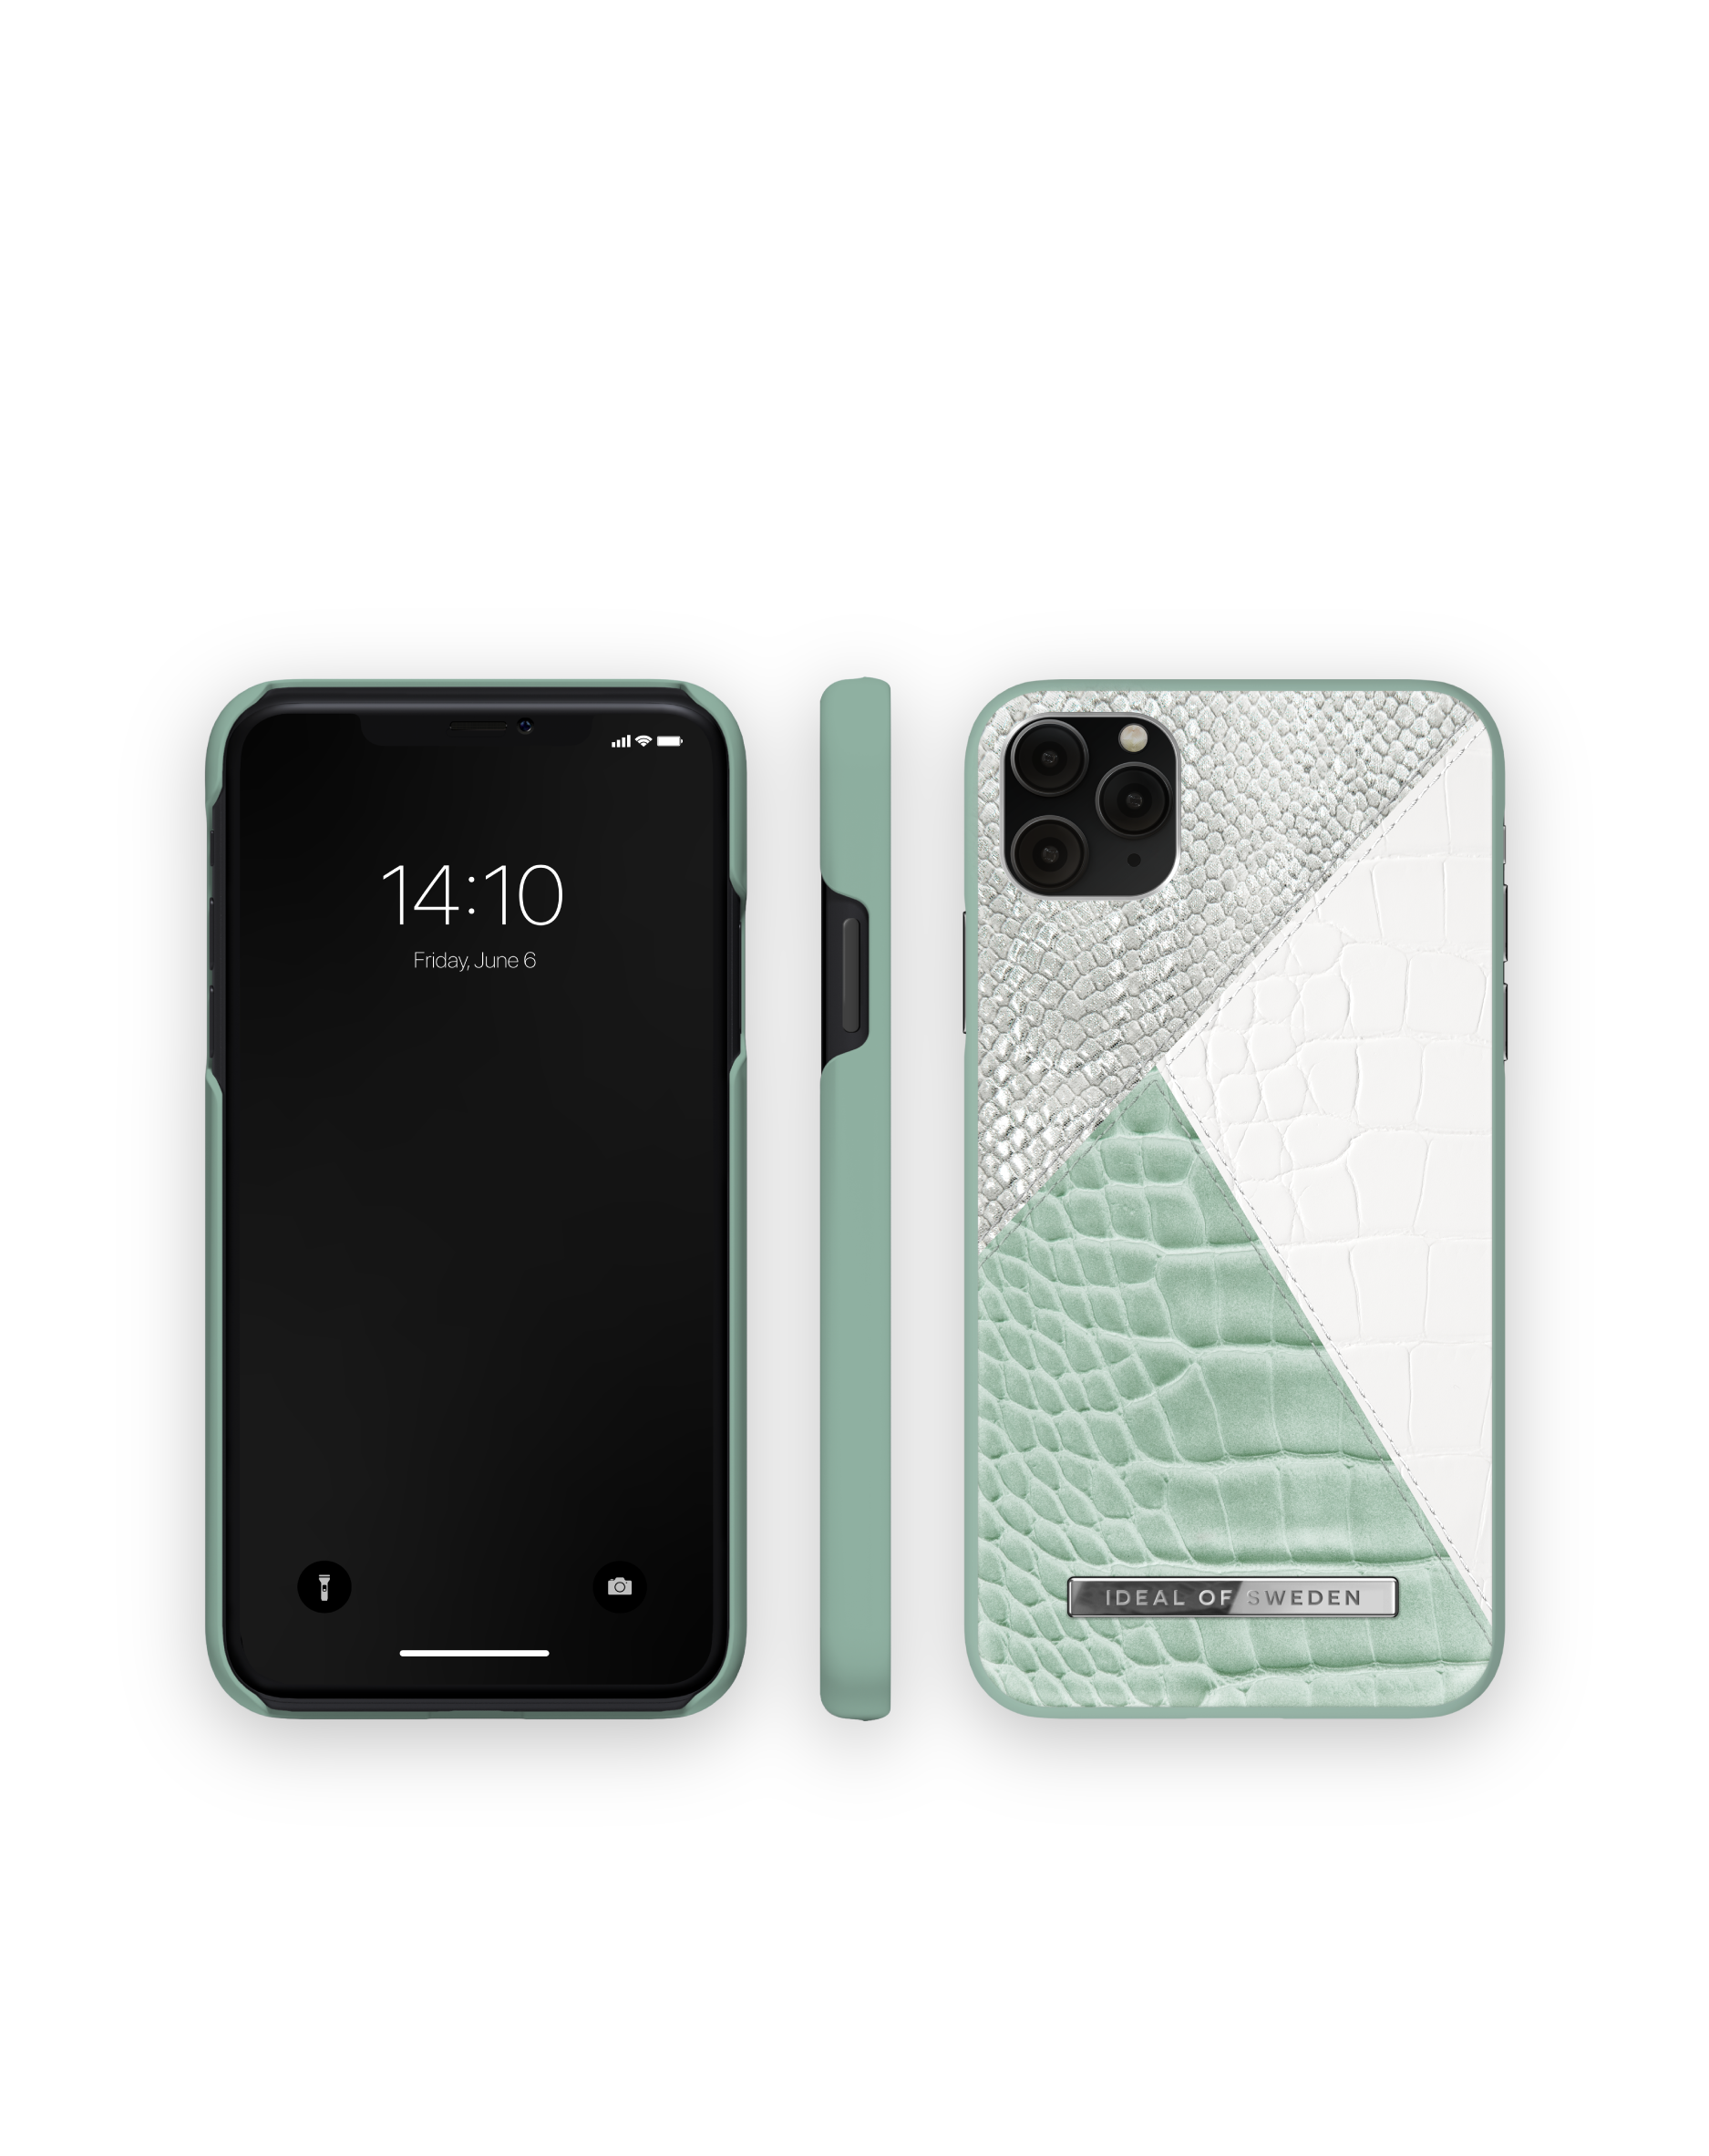 Mint iPhone Max, OF Snake SWEDEN Apple Backcover, Max, IDEAL iPhone 11 IDACSS21-I1965-268, Palladian XS Apple Pro Apple,